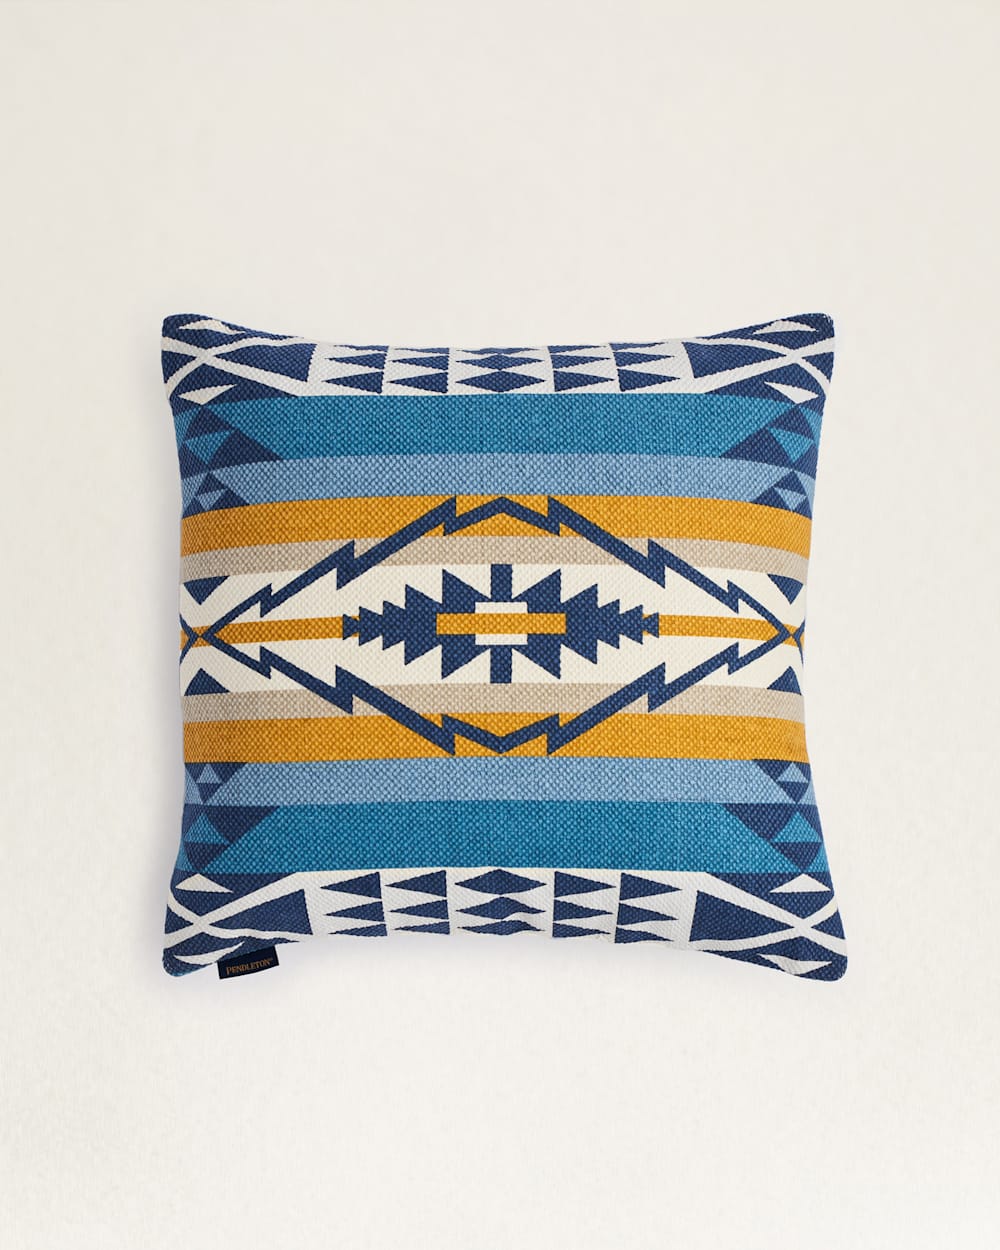 TRAPPER PEAK PRINTED KILIM SQUARE PILLOW IN BLUE/GOLD image number 1